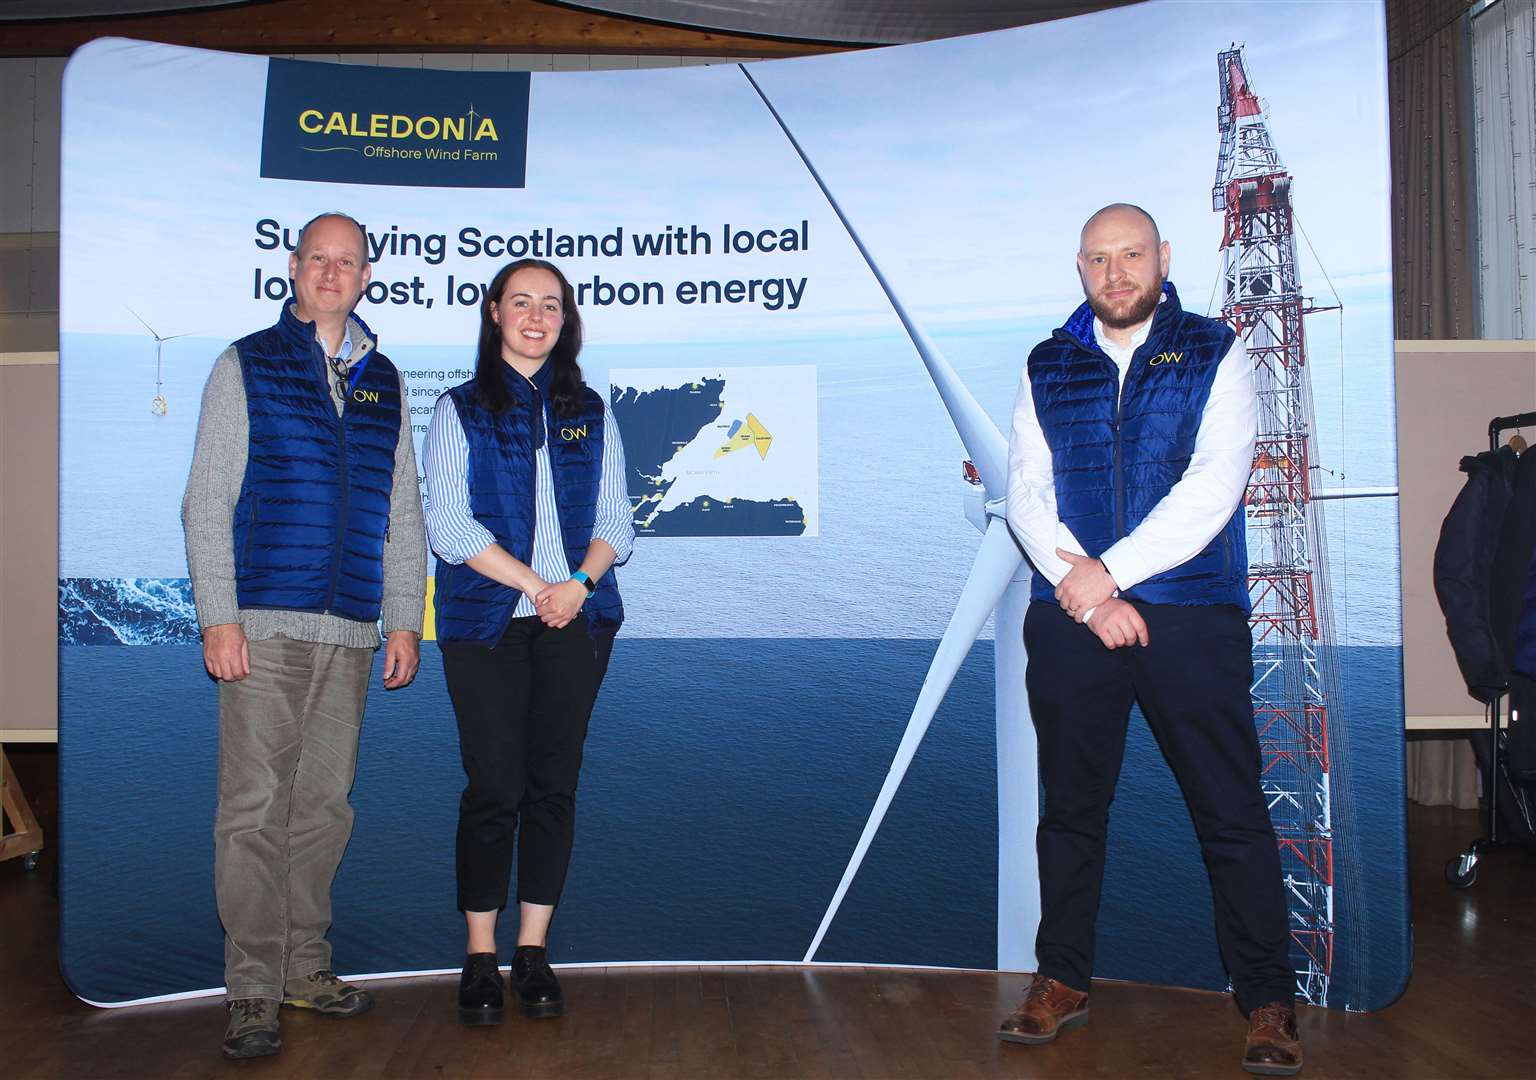 Ian Adams, Jennifer Stavert and Andrew Hamilton from the Caledonia offshore wind farm team at Monday's public consultation event in Wick. Picture: Alan Hendry